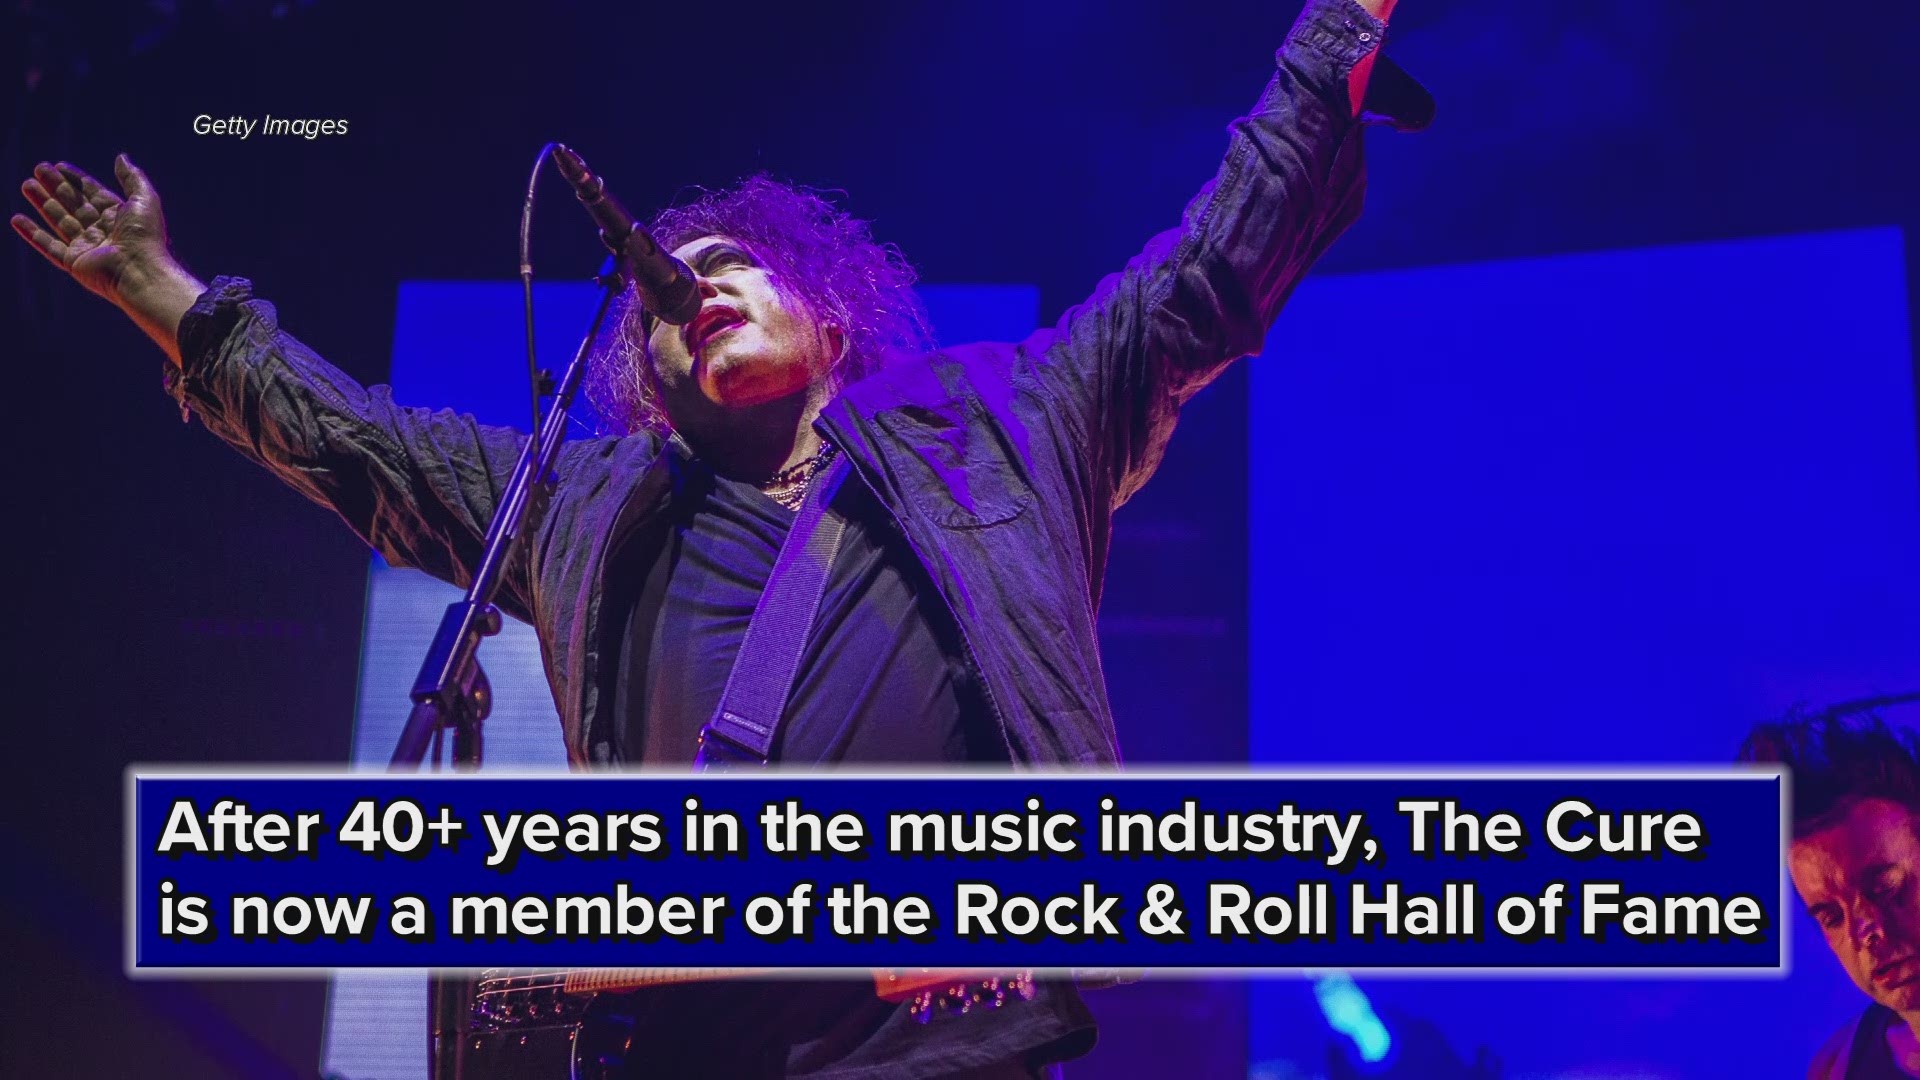 After 40 plus years in the music industry, The Cure is now in the Rock & Roll Hall of Fame